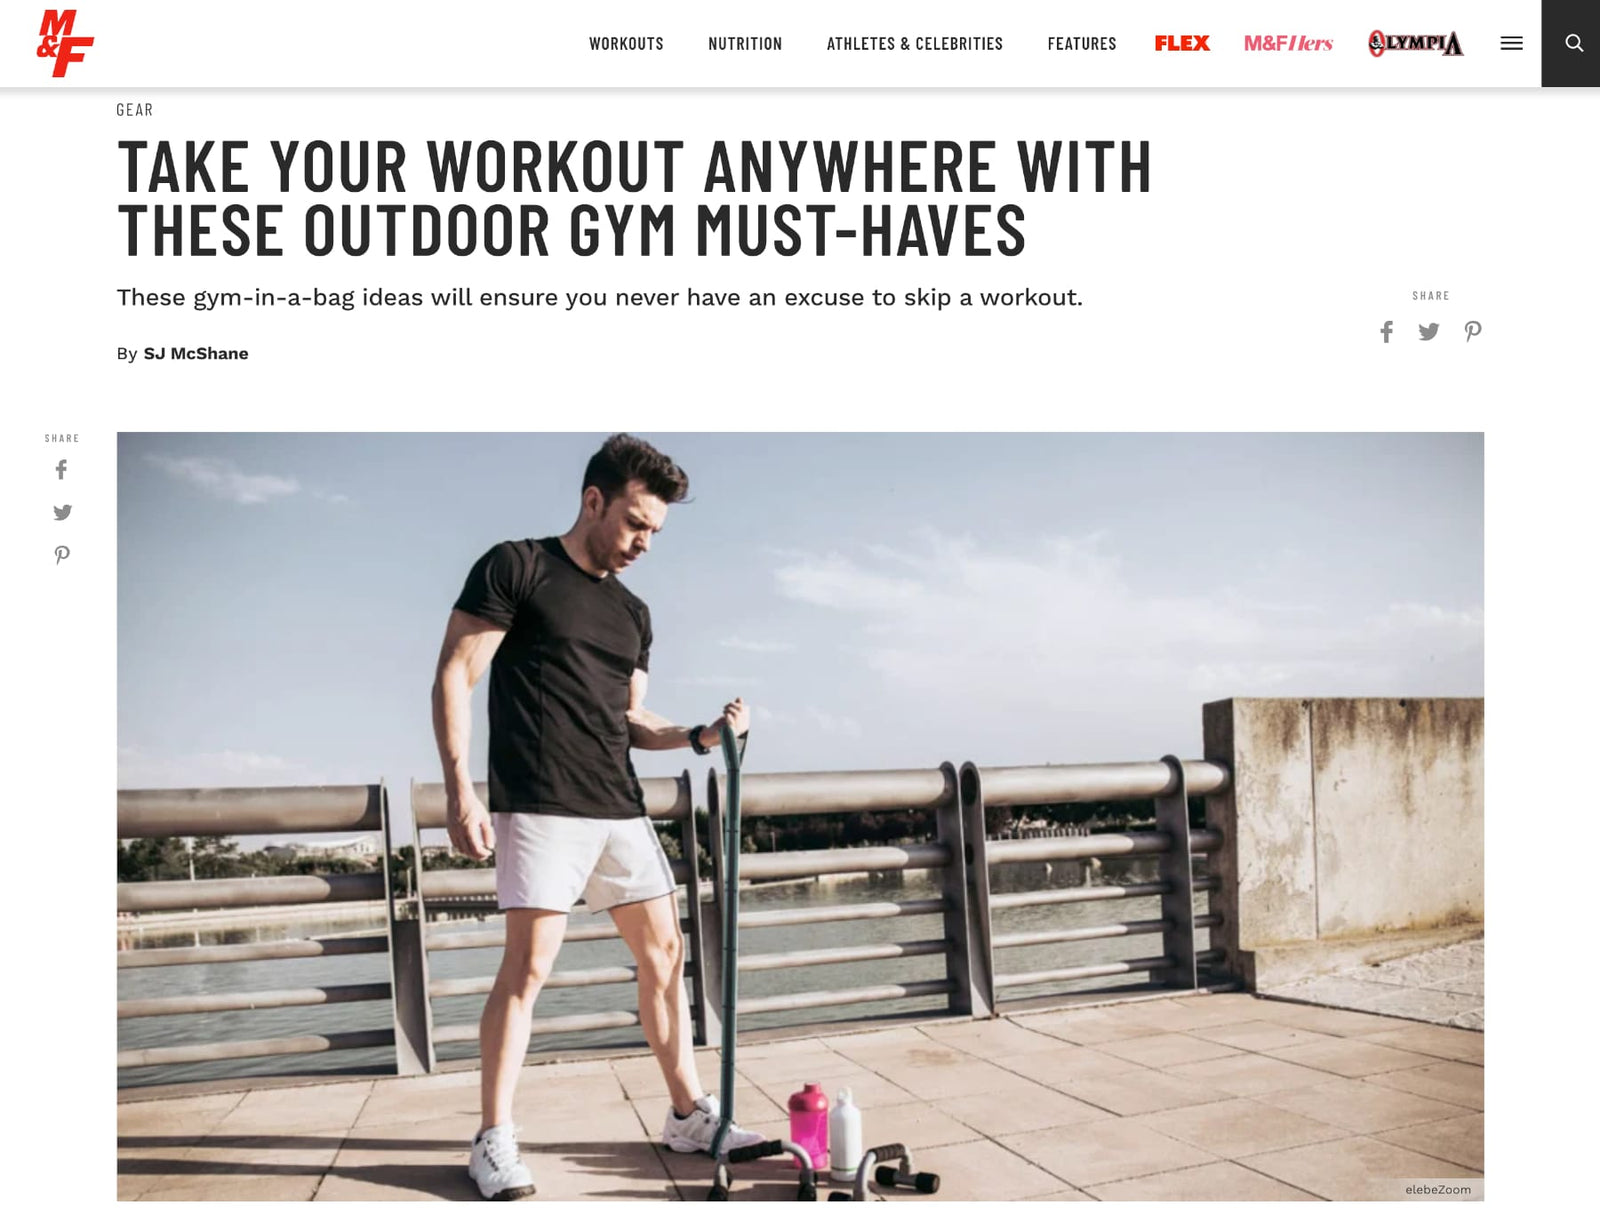 Muscle & Fitness: Take Your Workout Anywhere With These Outdoor